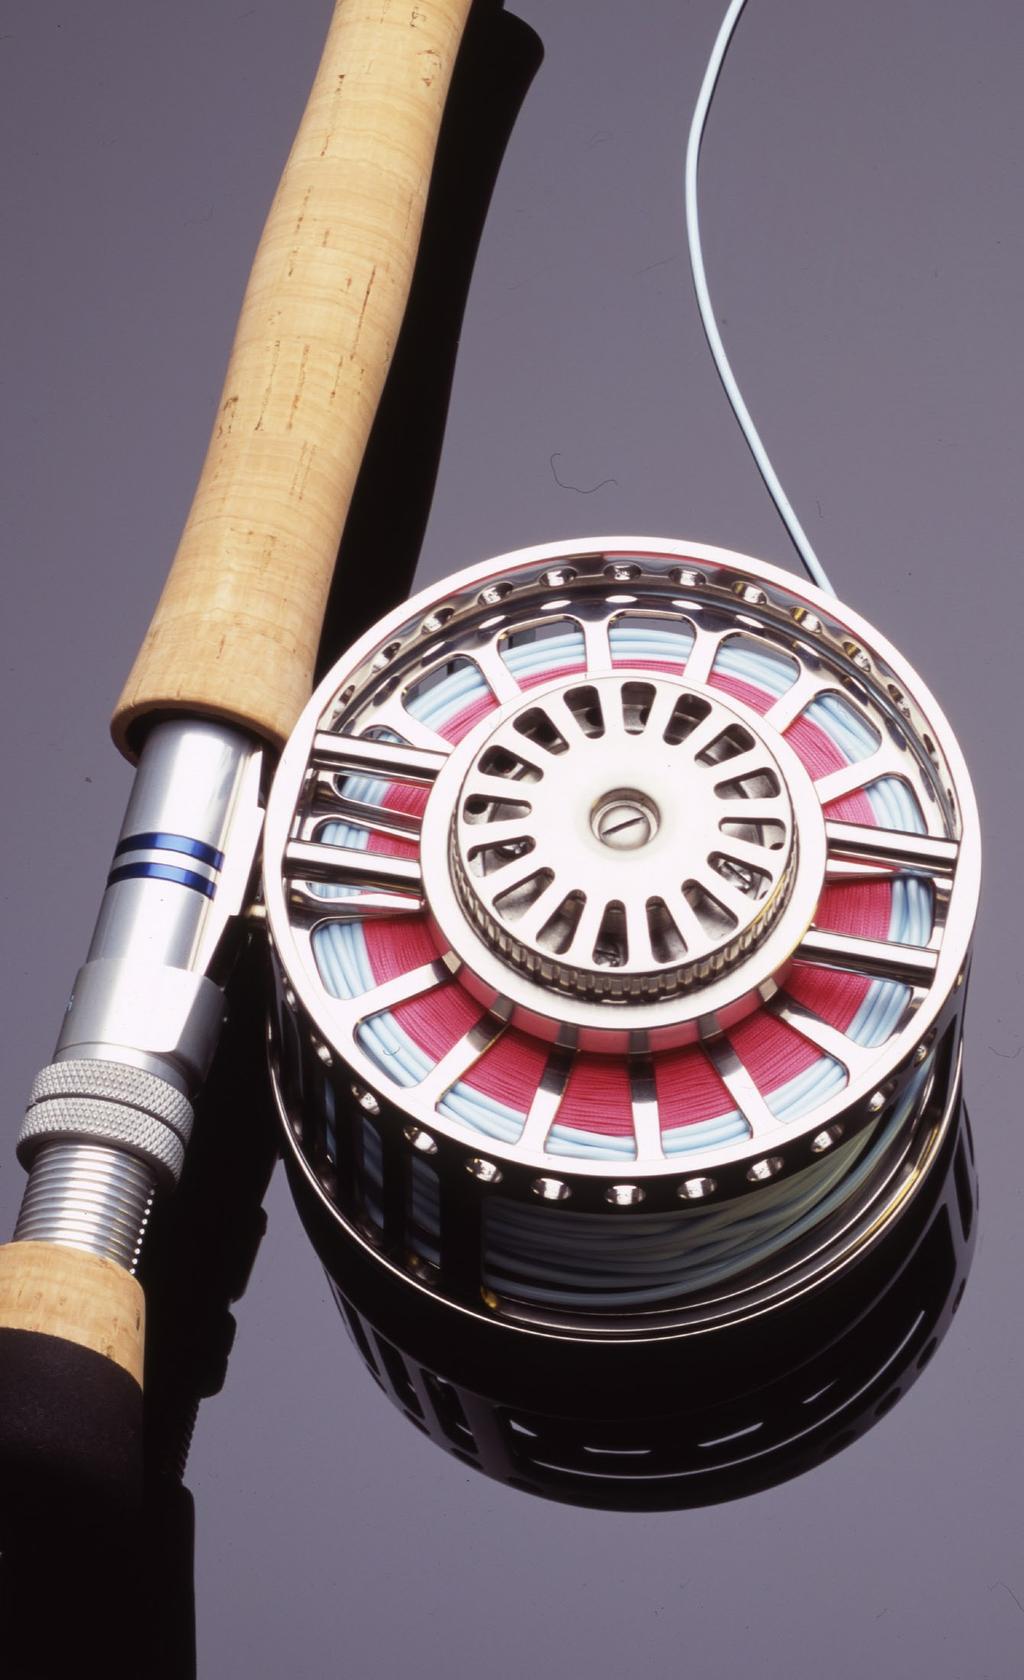 Zane Titanium Reel The Hardy Zane Titanium must be the ultimate saltwater reel on the planet. Crafted from Titanium barstock, which requires six days of machining to form just the cage and spool.